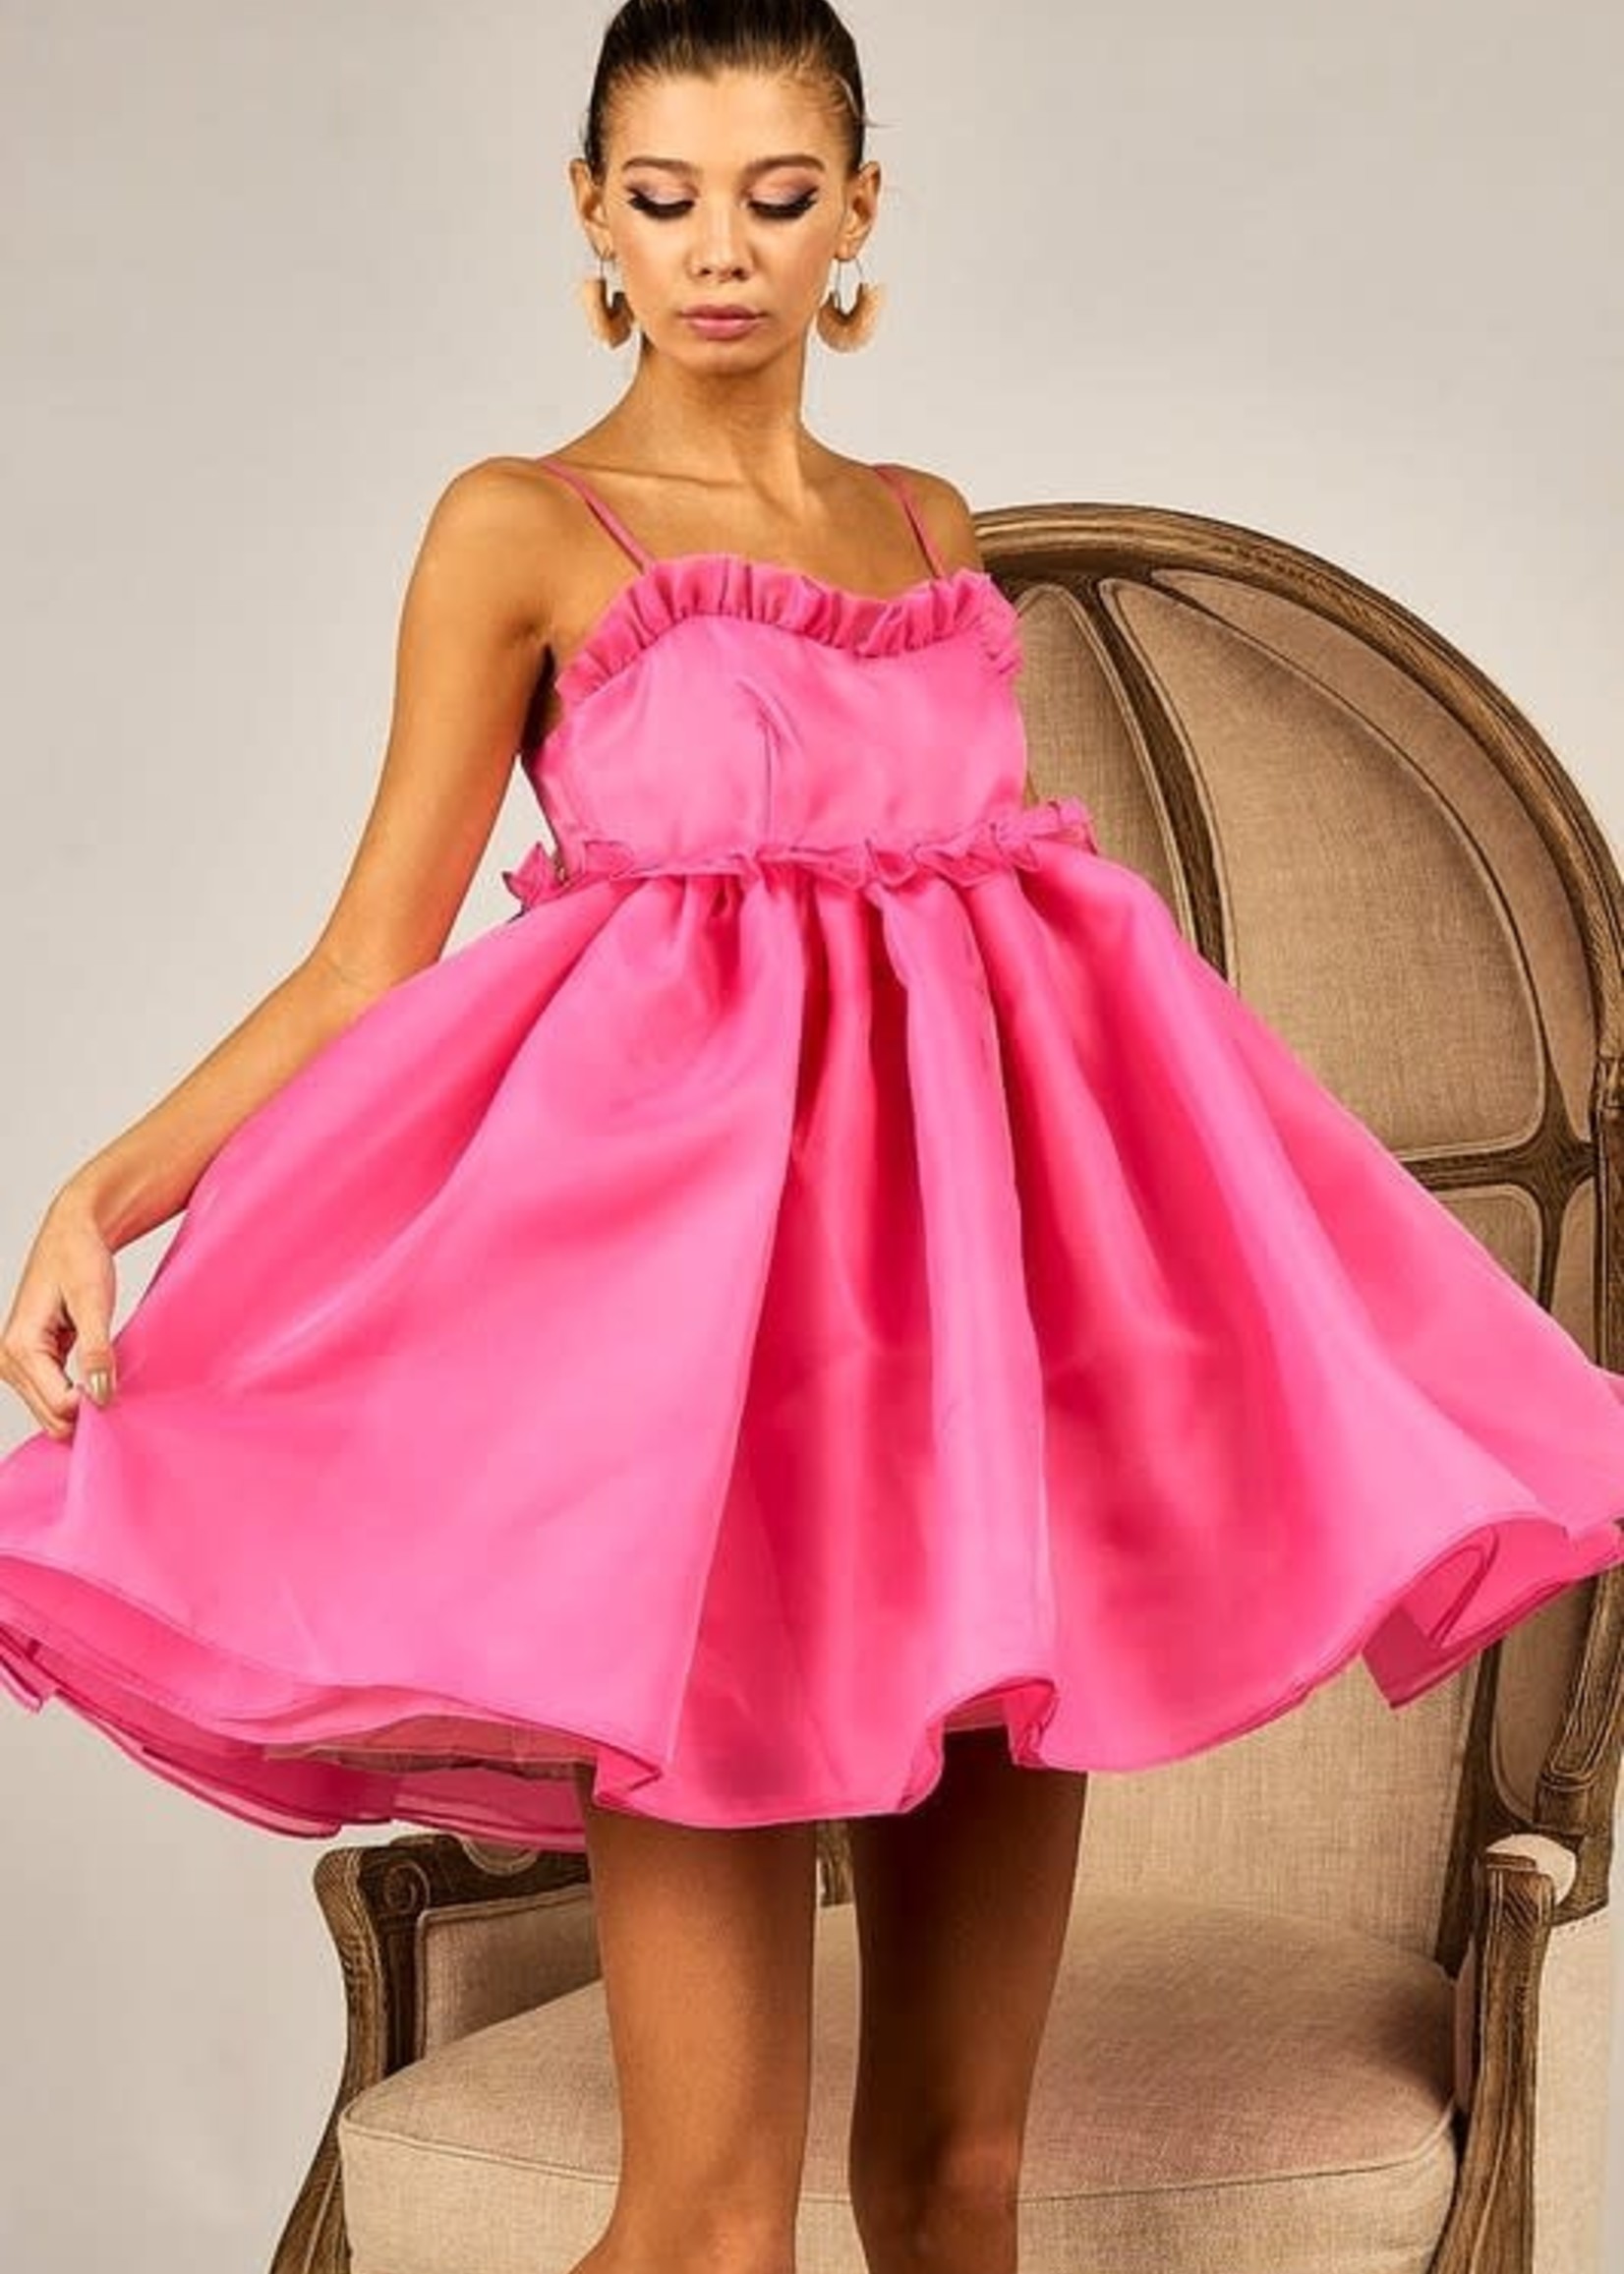 Best Party Hot Pink Dress